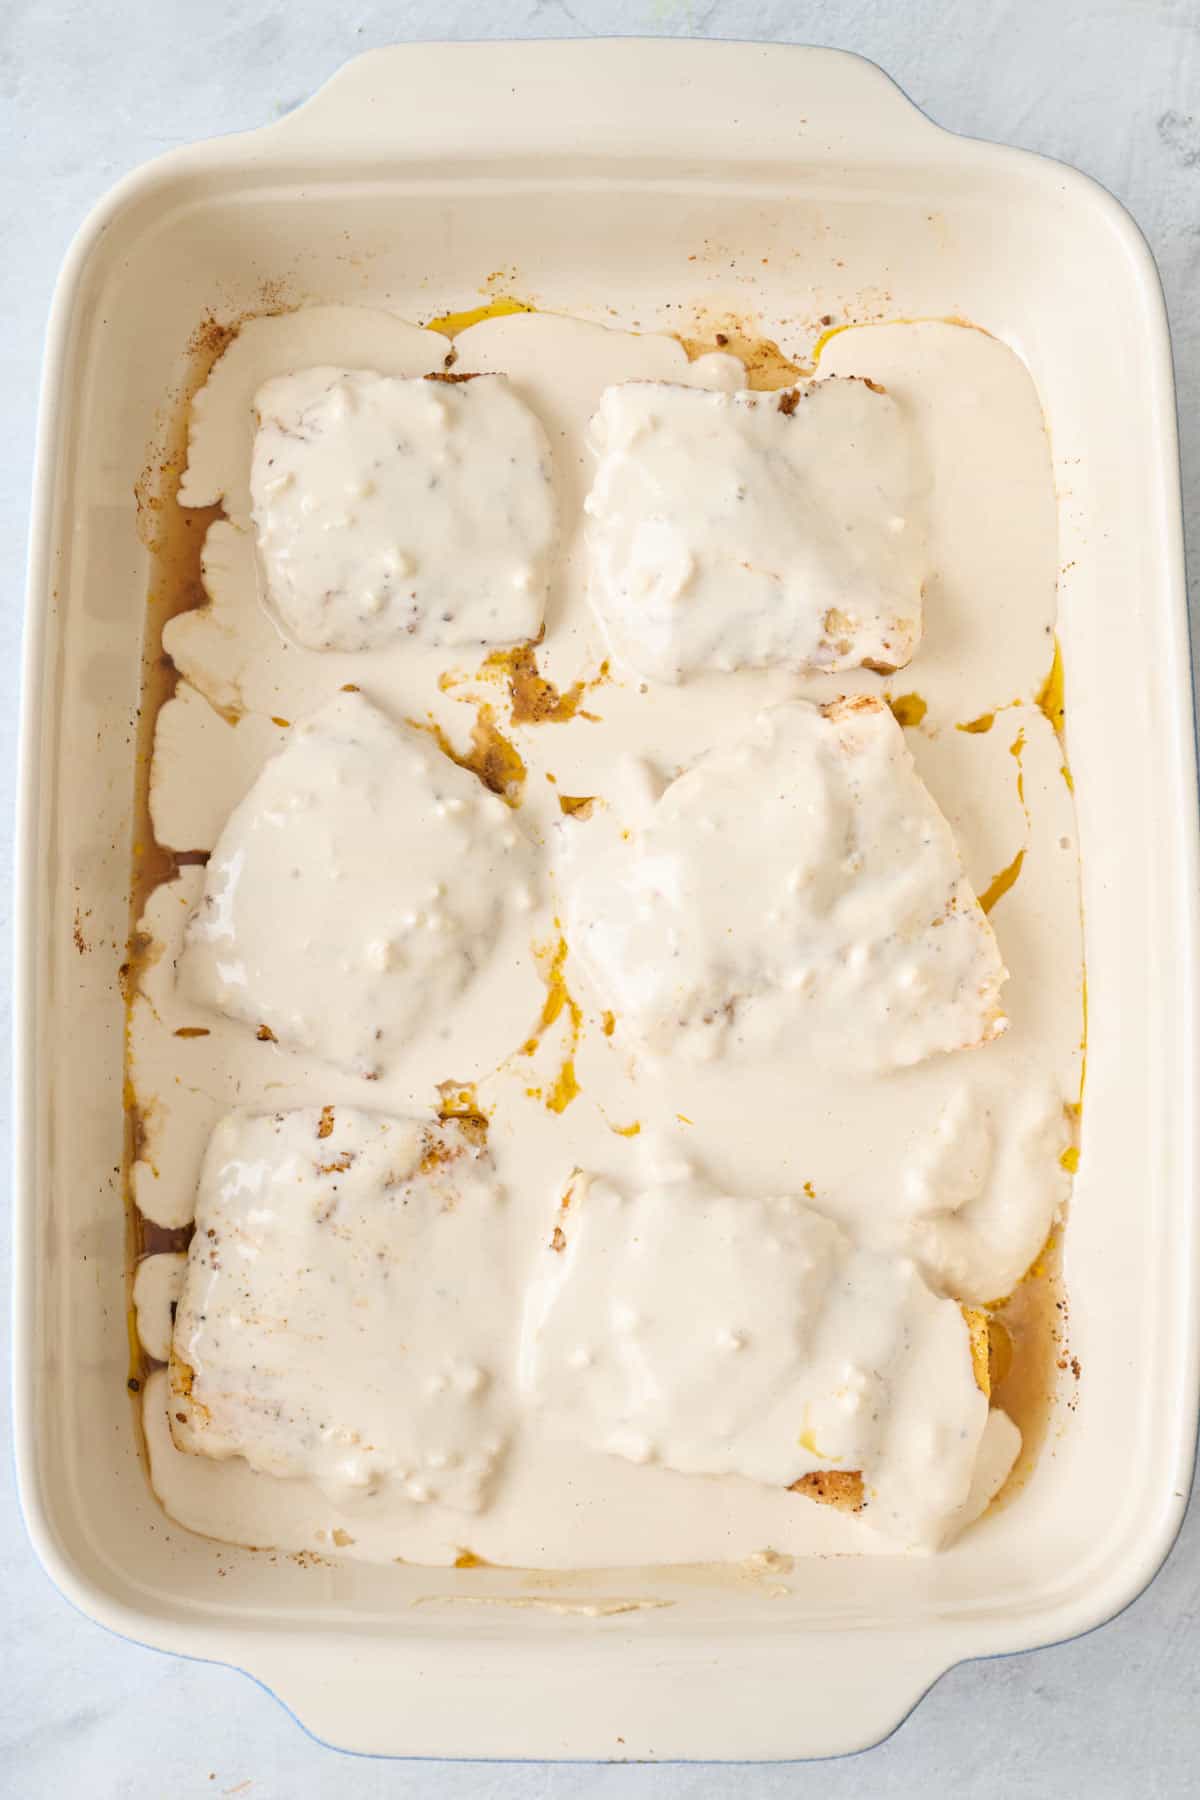 Fish in baking dish with tahini sauce poured over it.